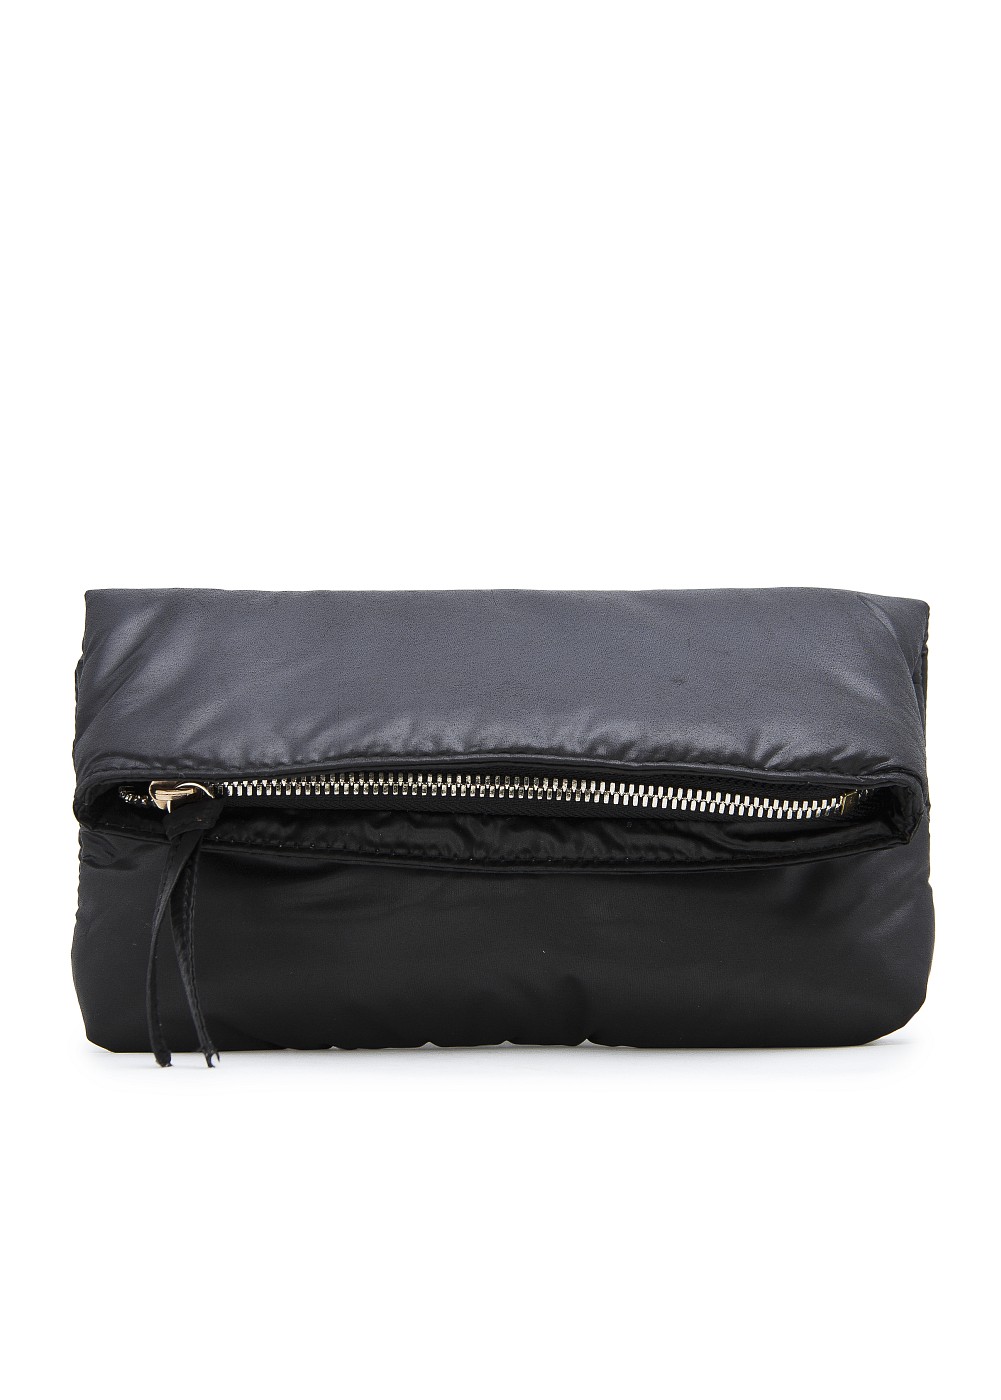 Lyst - Mango Touch Padded Cosmetic Bag in Black